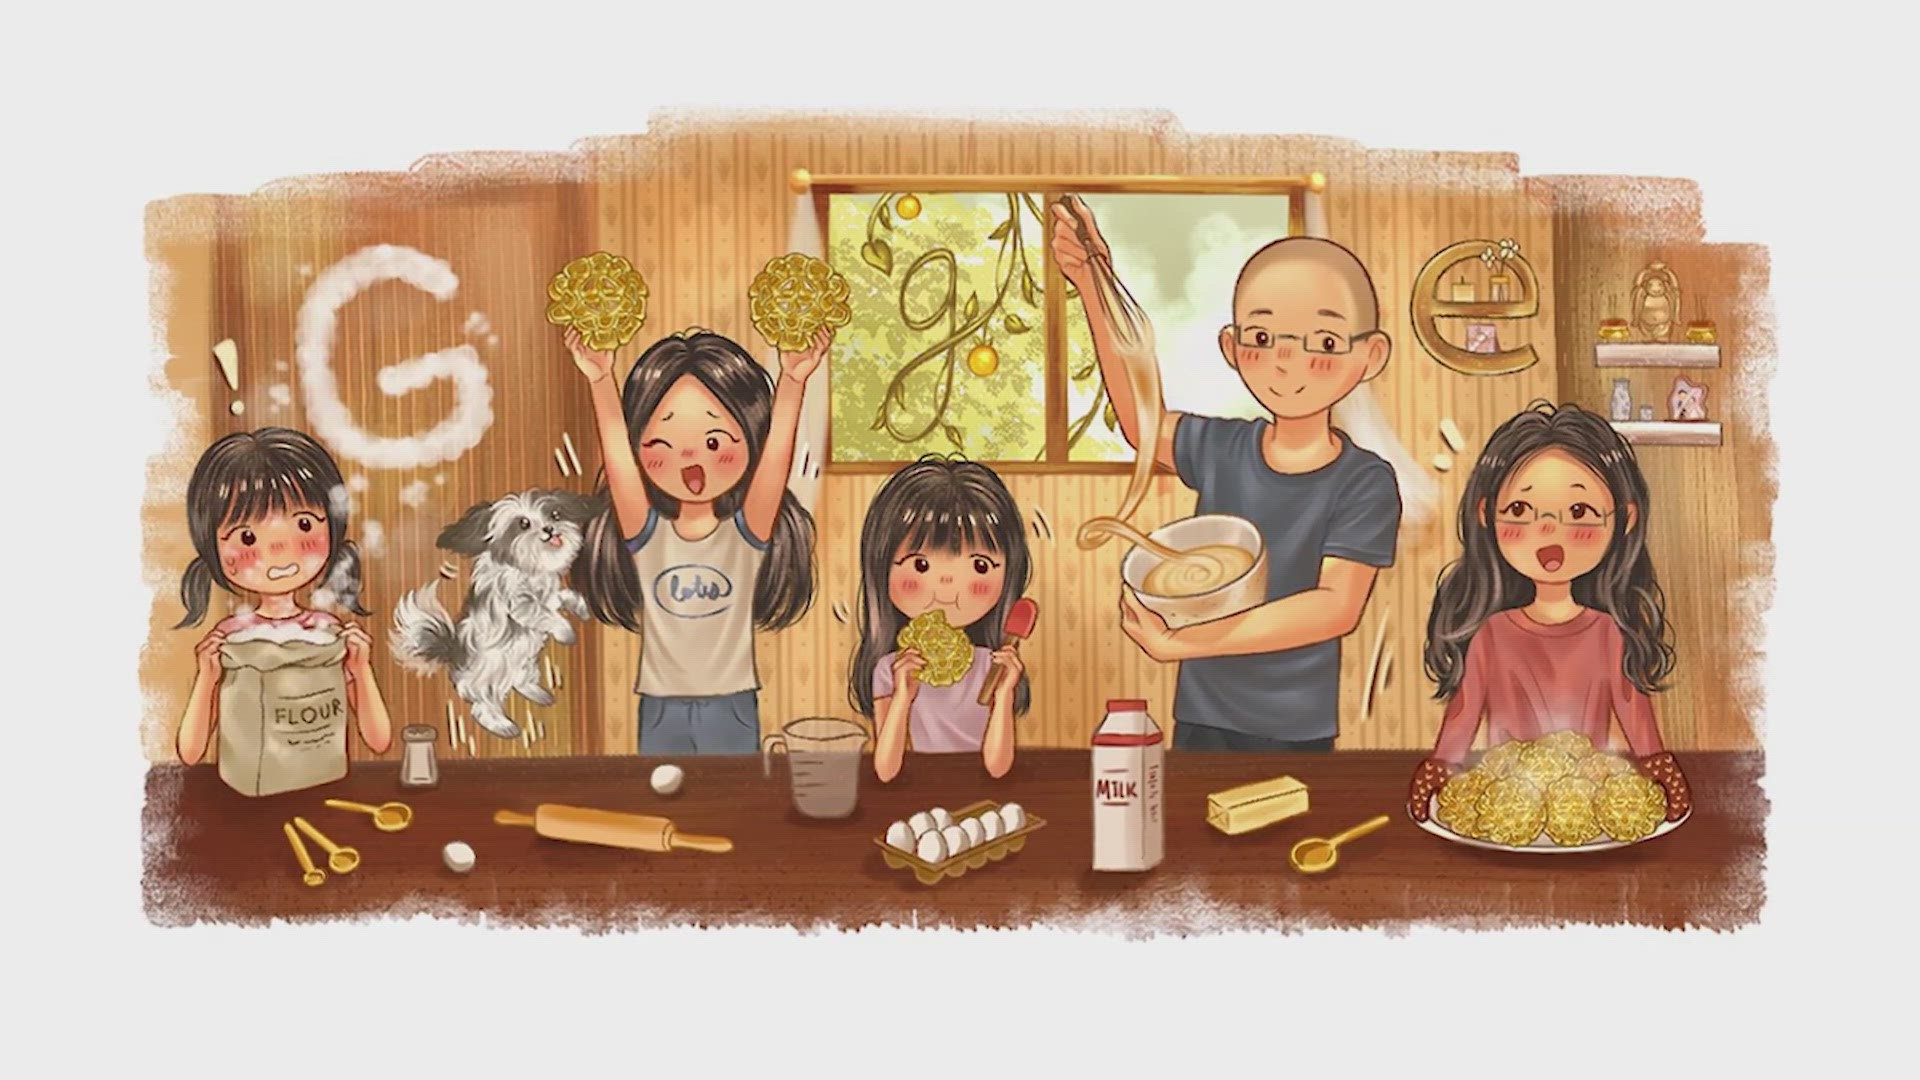 The national winner’s artwork will be displayed on Google.com for one day.